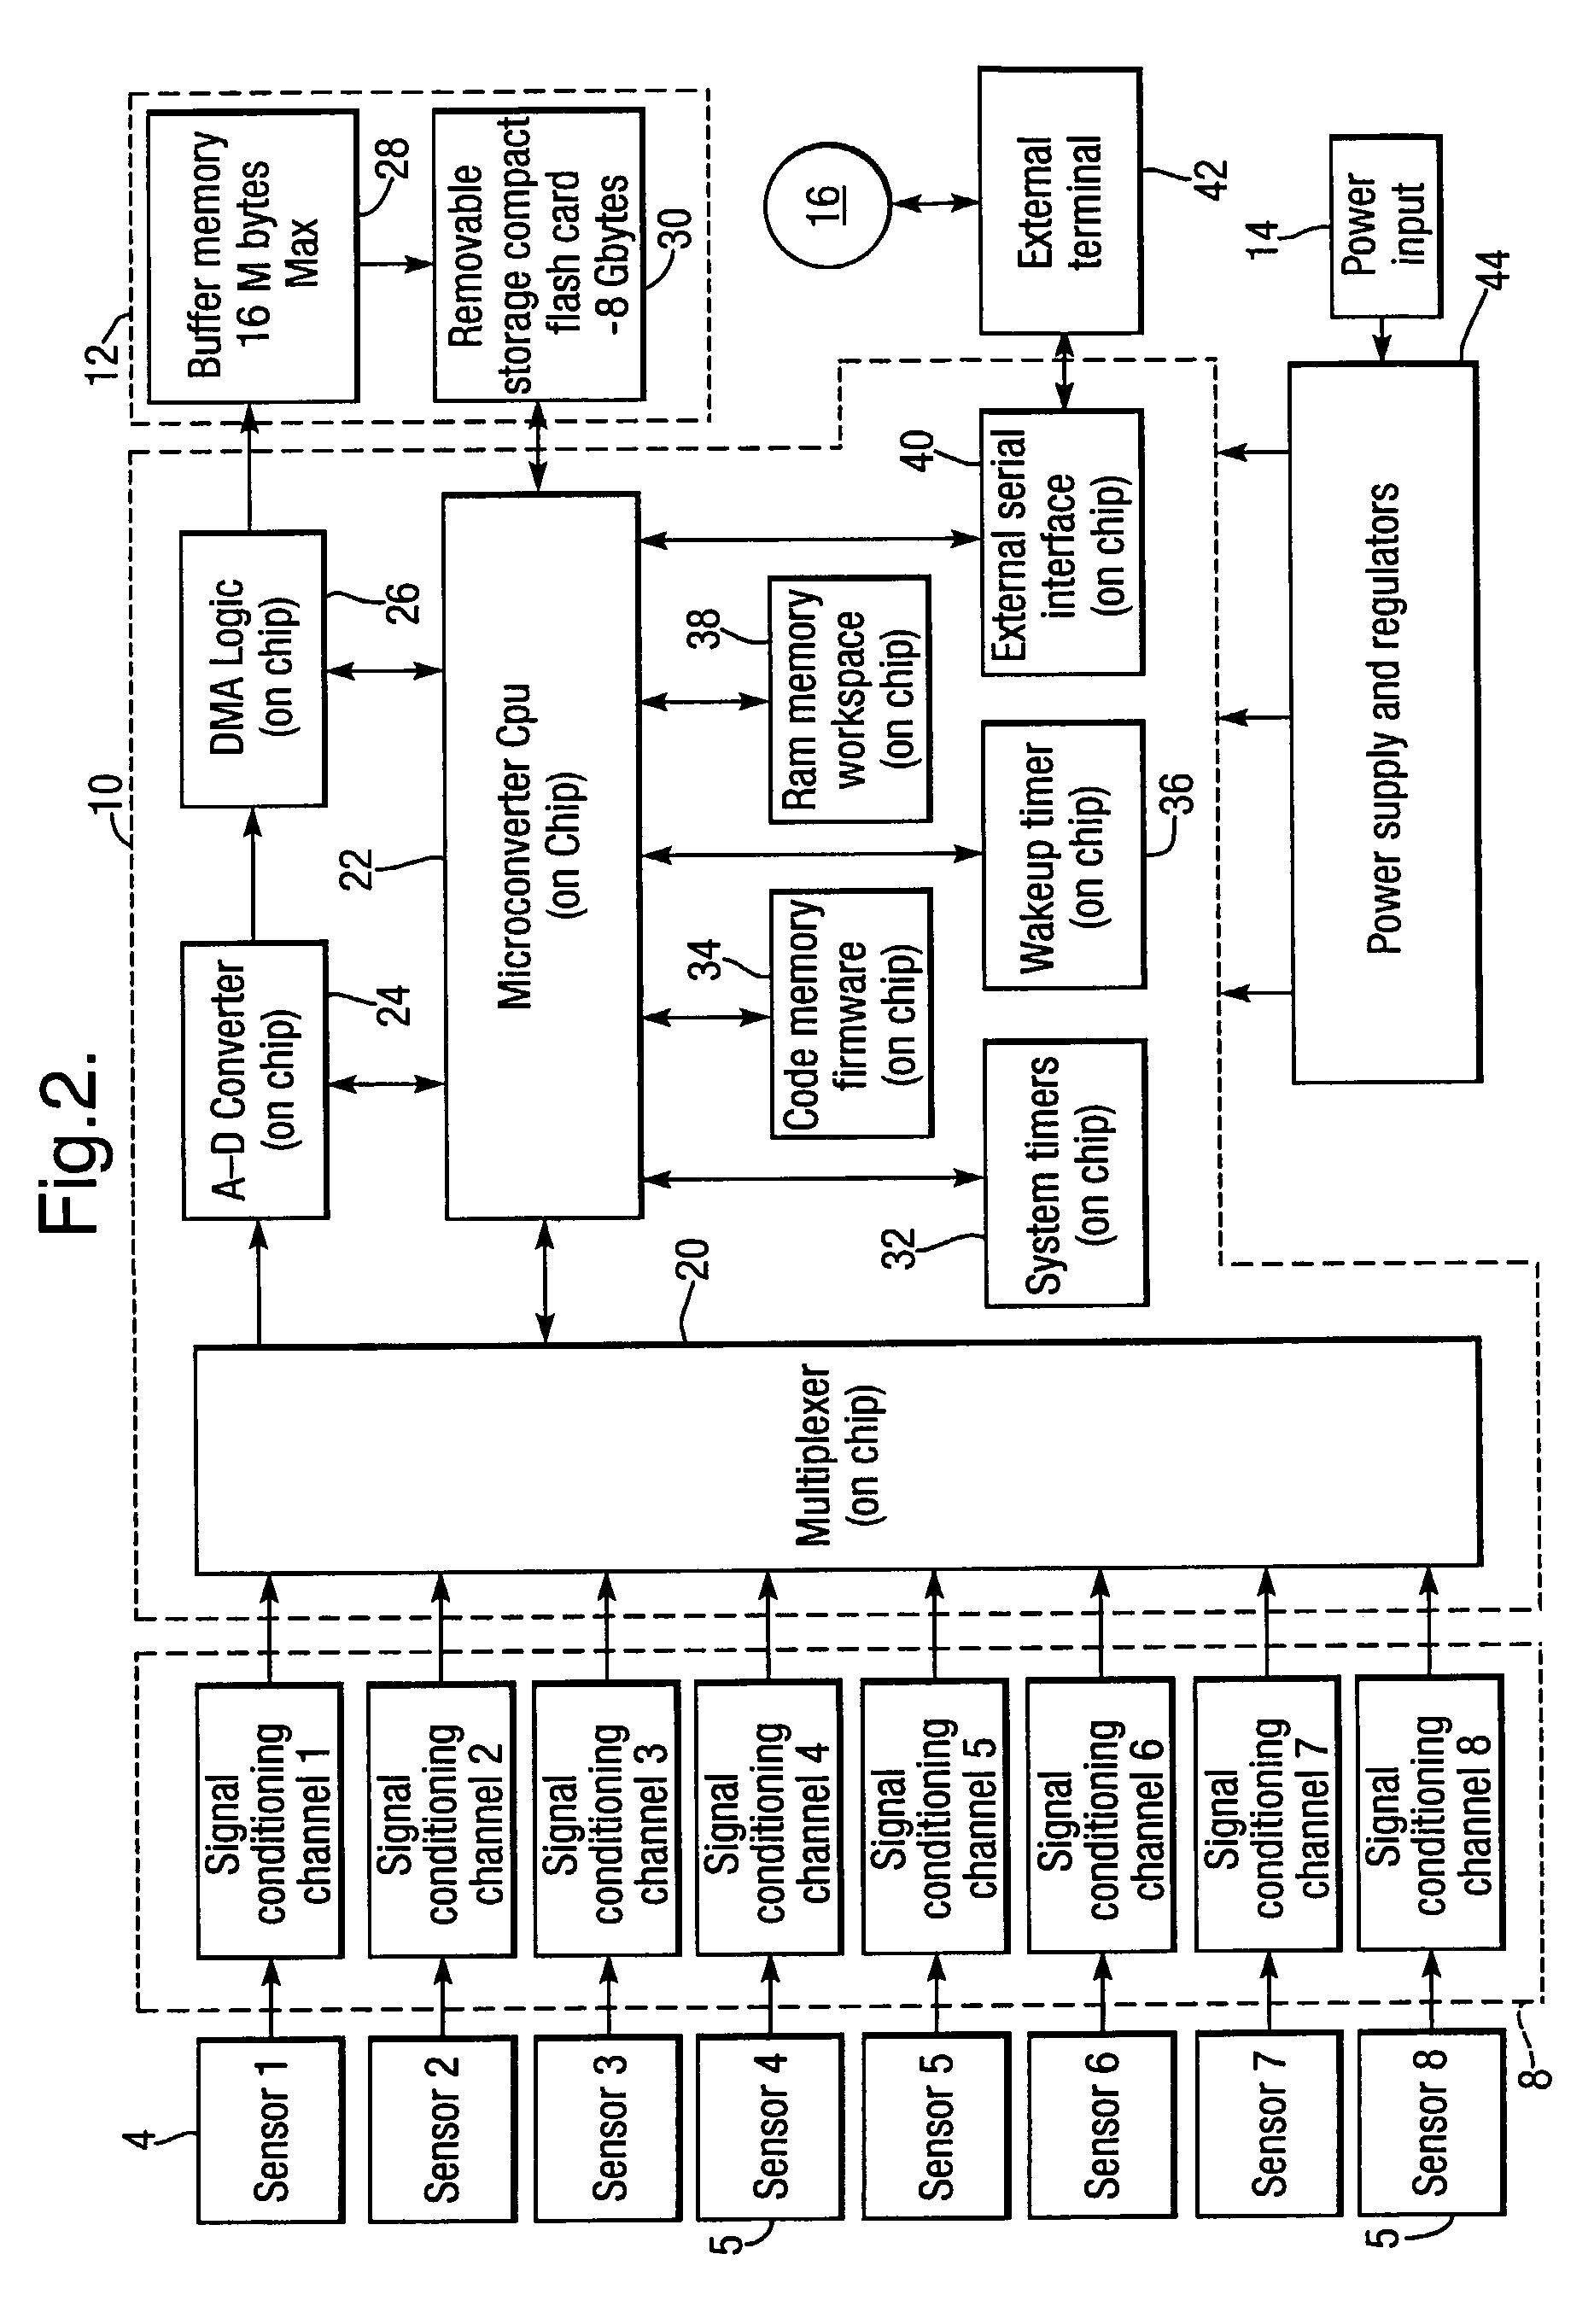 Apparatus and method for measuring loads sustained by a bearing pin